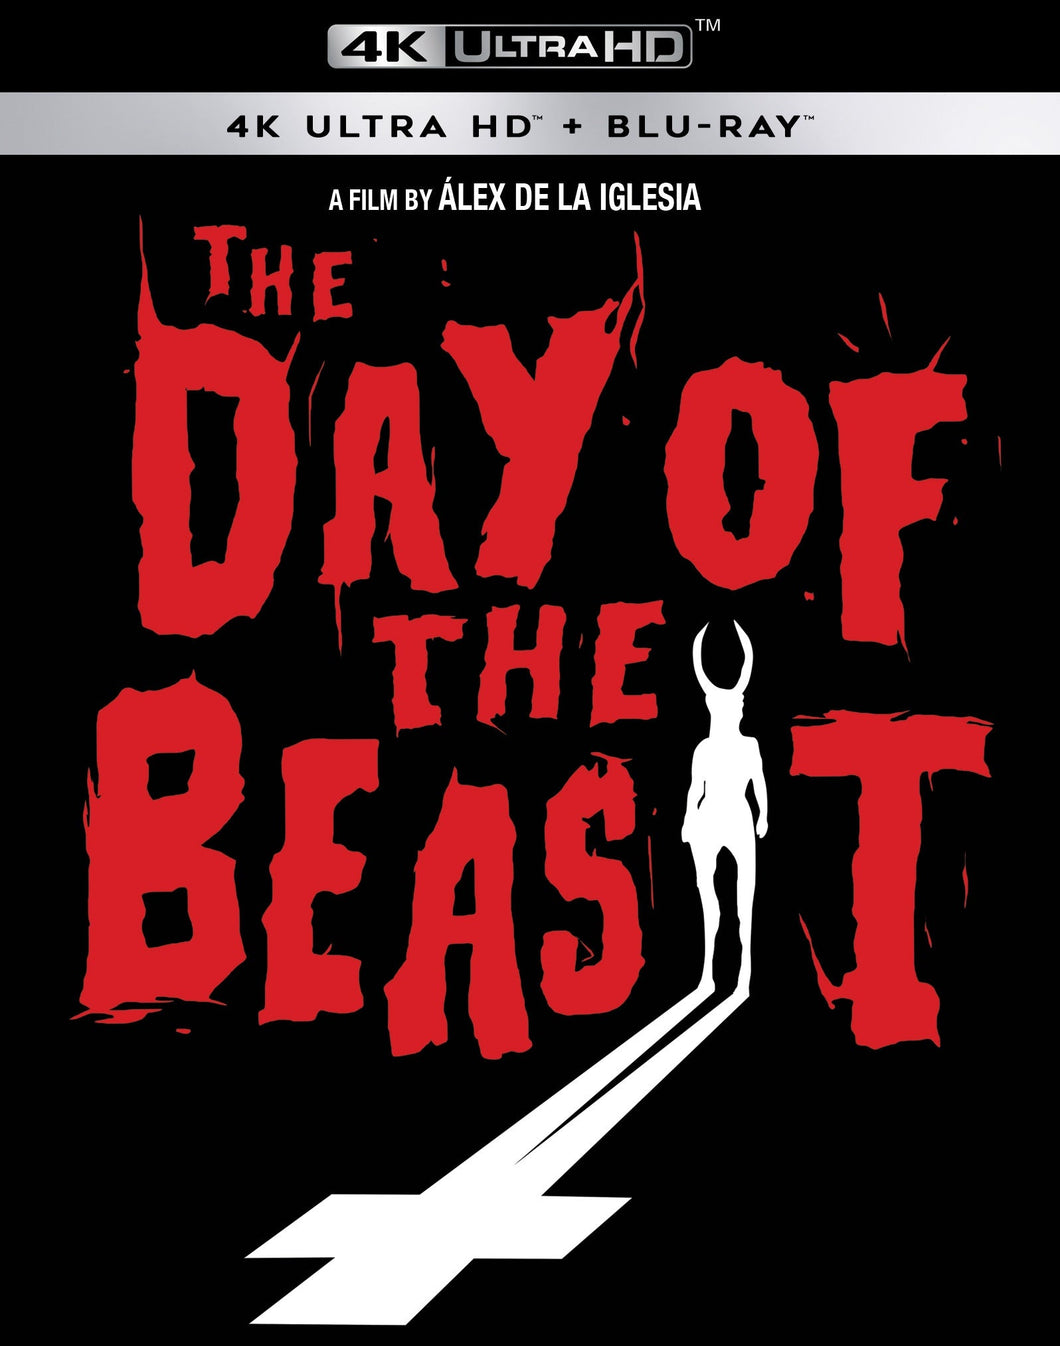 DAY OF THE BEAST, THE 4K BLU-RAY